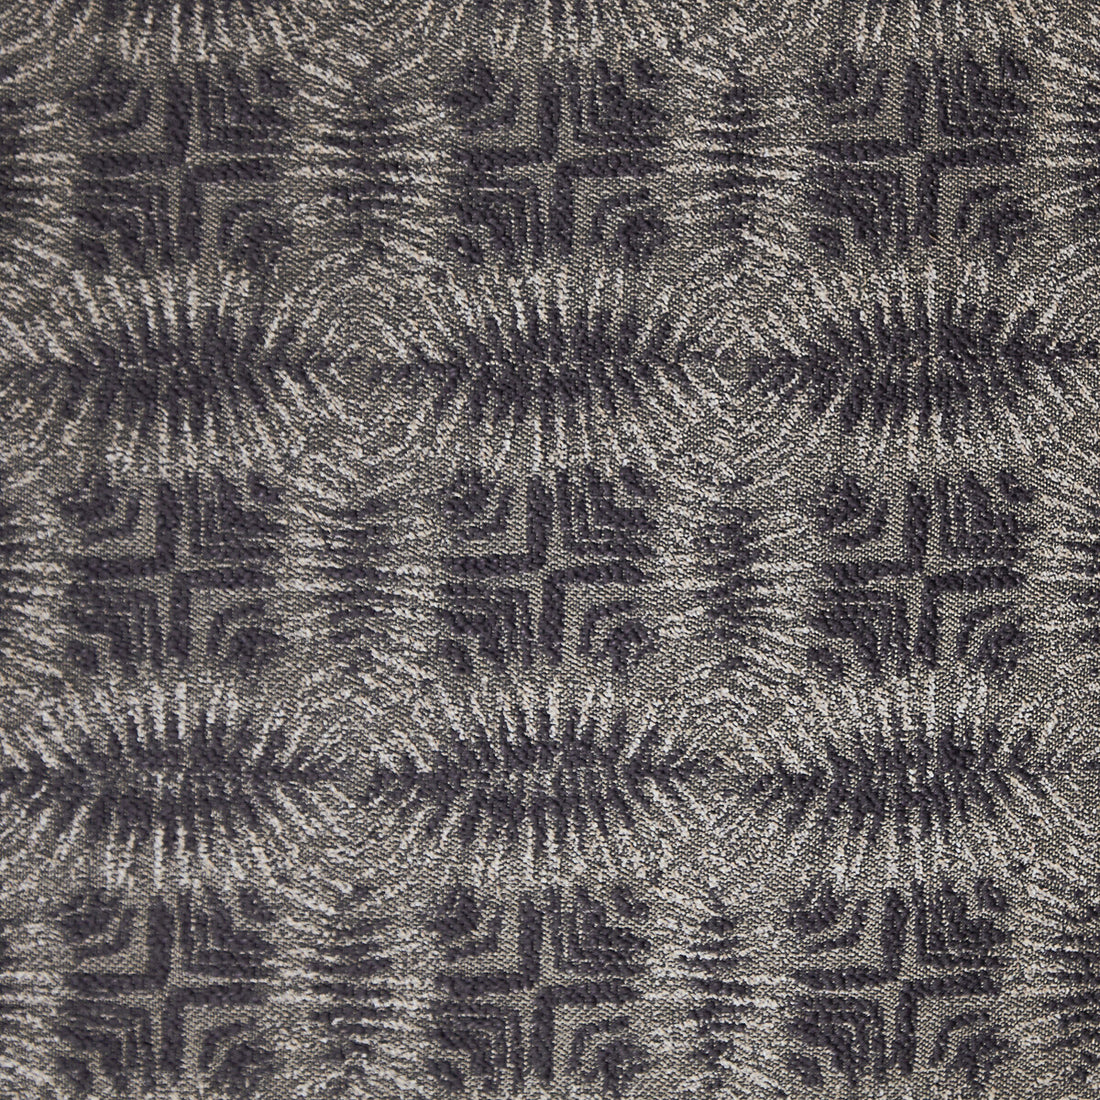 Calypso fabric in taupe color - pattern GWF-3204.816.0 - by Lee Jofa Modern in the Allegra Hicks Islands collection